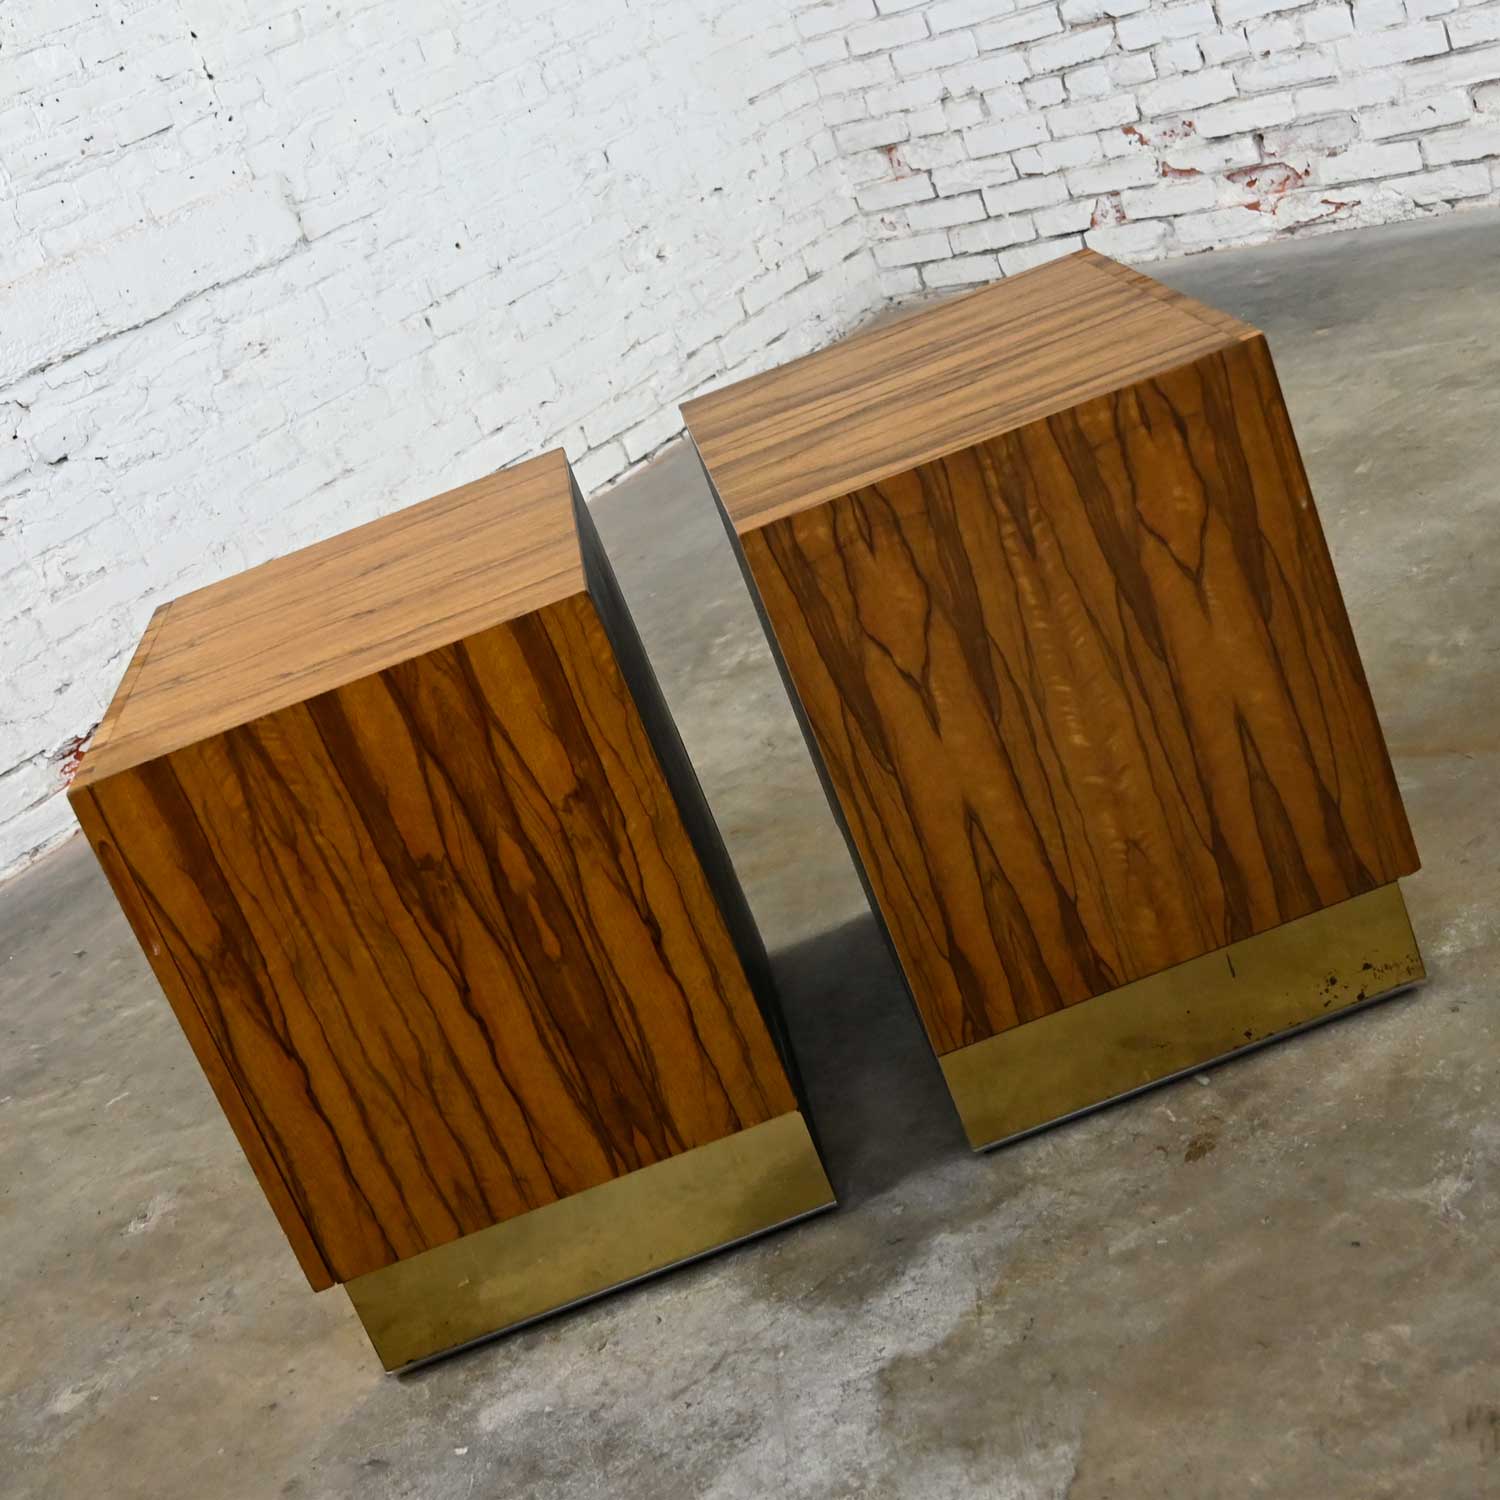 Vintage Modern Rosewood Pair of Cube Nightstands by Milo Baughman for Thayer Coggin